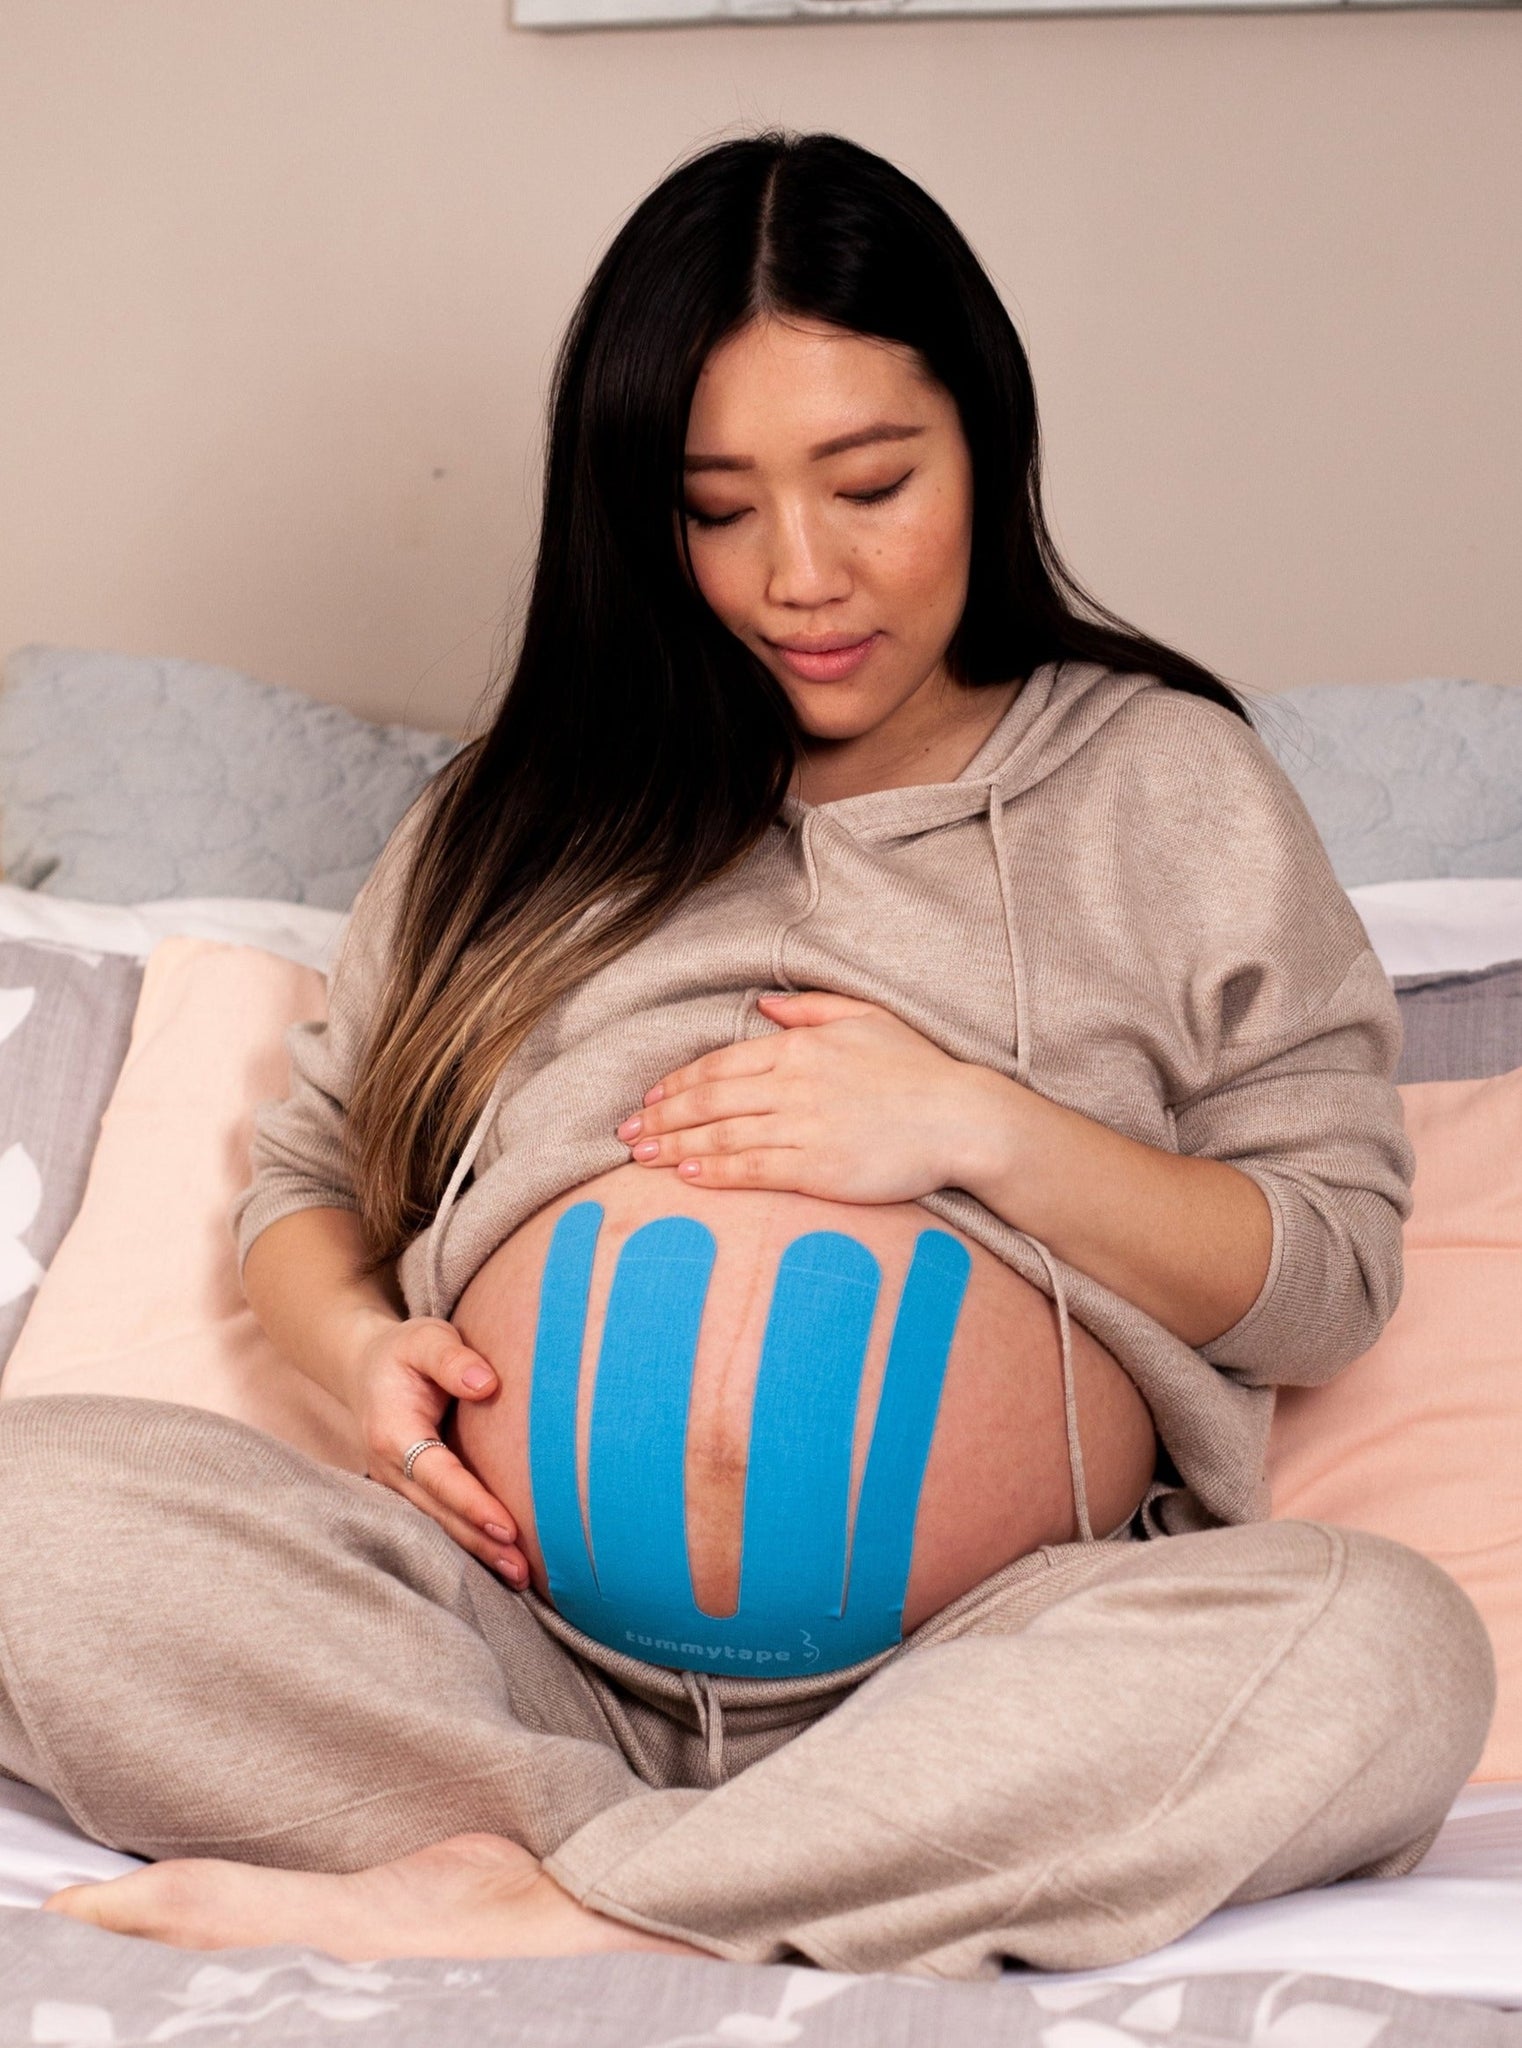 Pregnancy Tape - Helps with Pelvic, Belly and Back Support